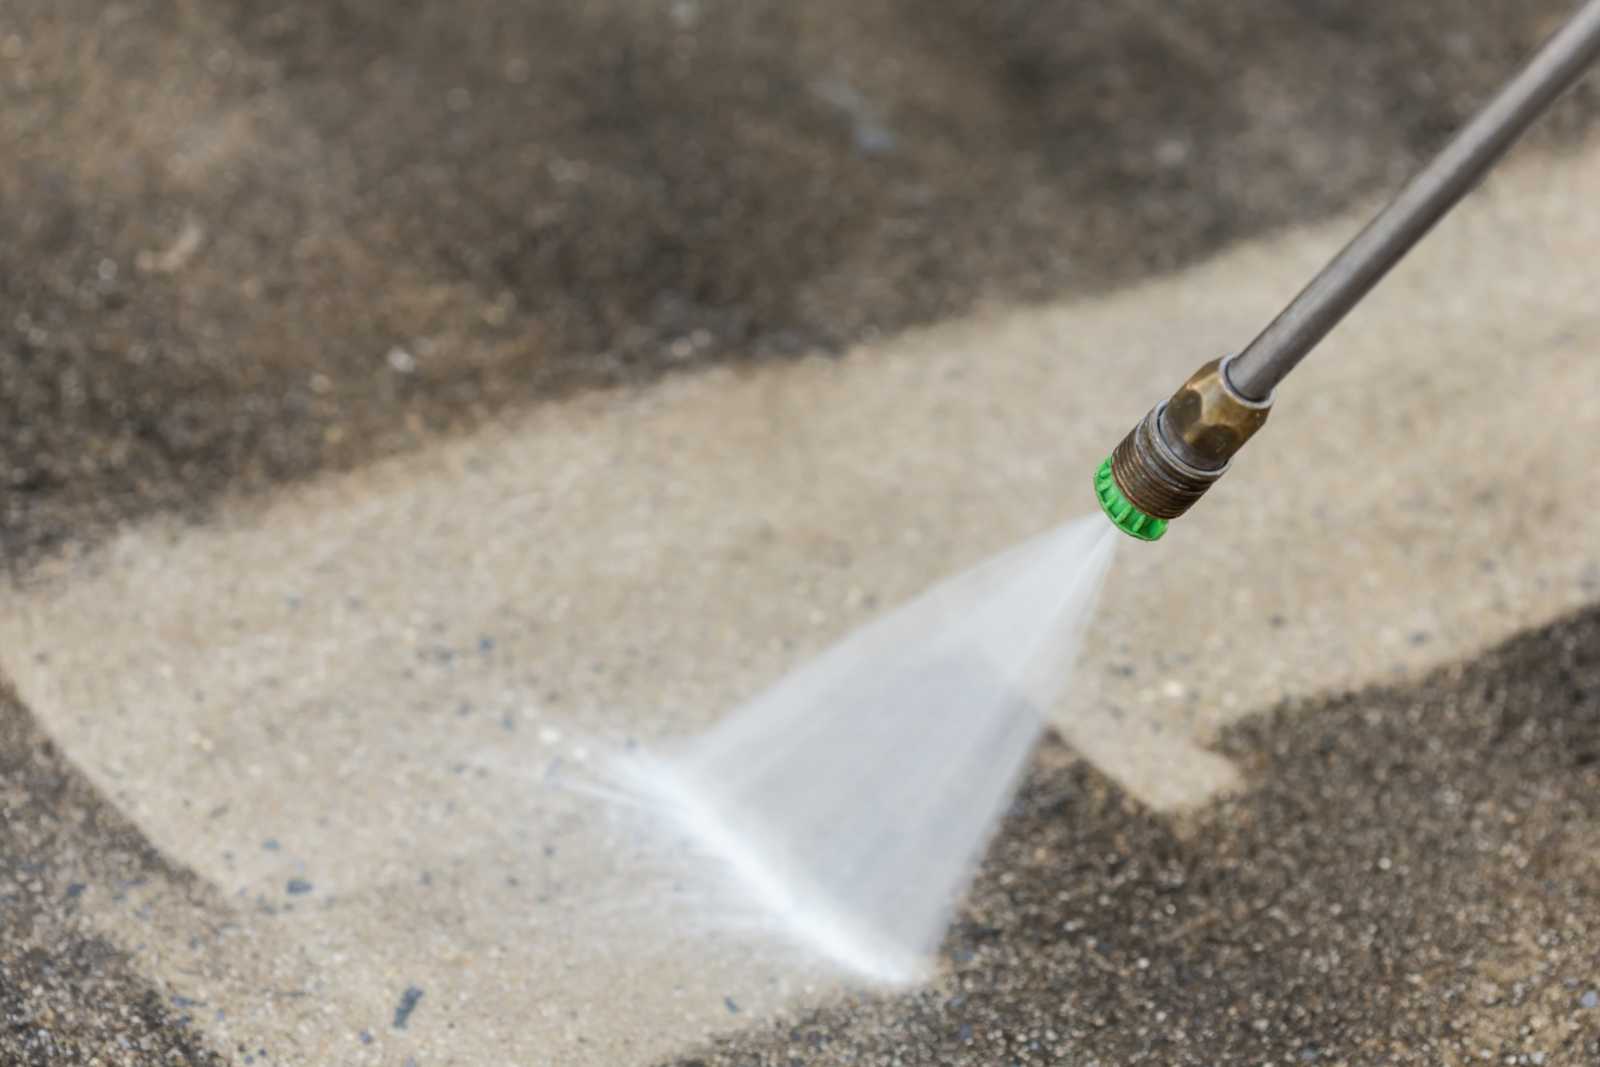 An image of a pressure washer spraying water at a concrete surface to clean it. The water stream is powerful and directed towards the ground, creating a splash and removing dirt and debris from the surface